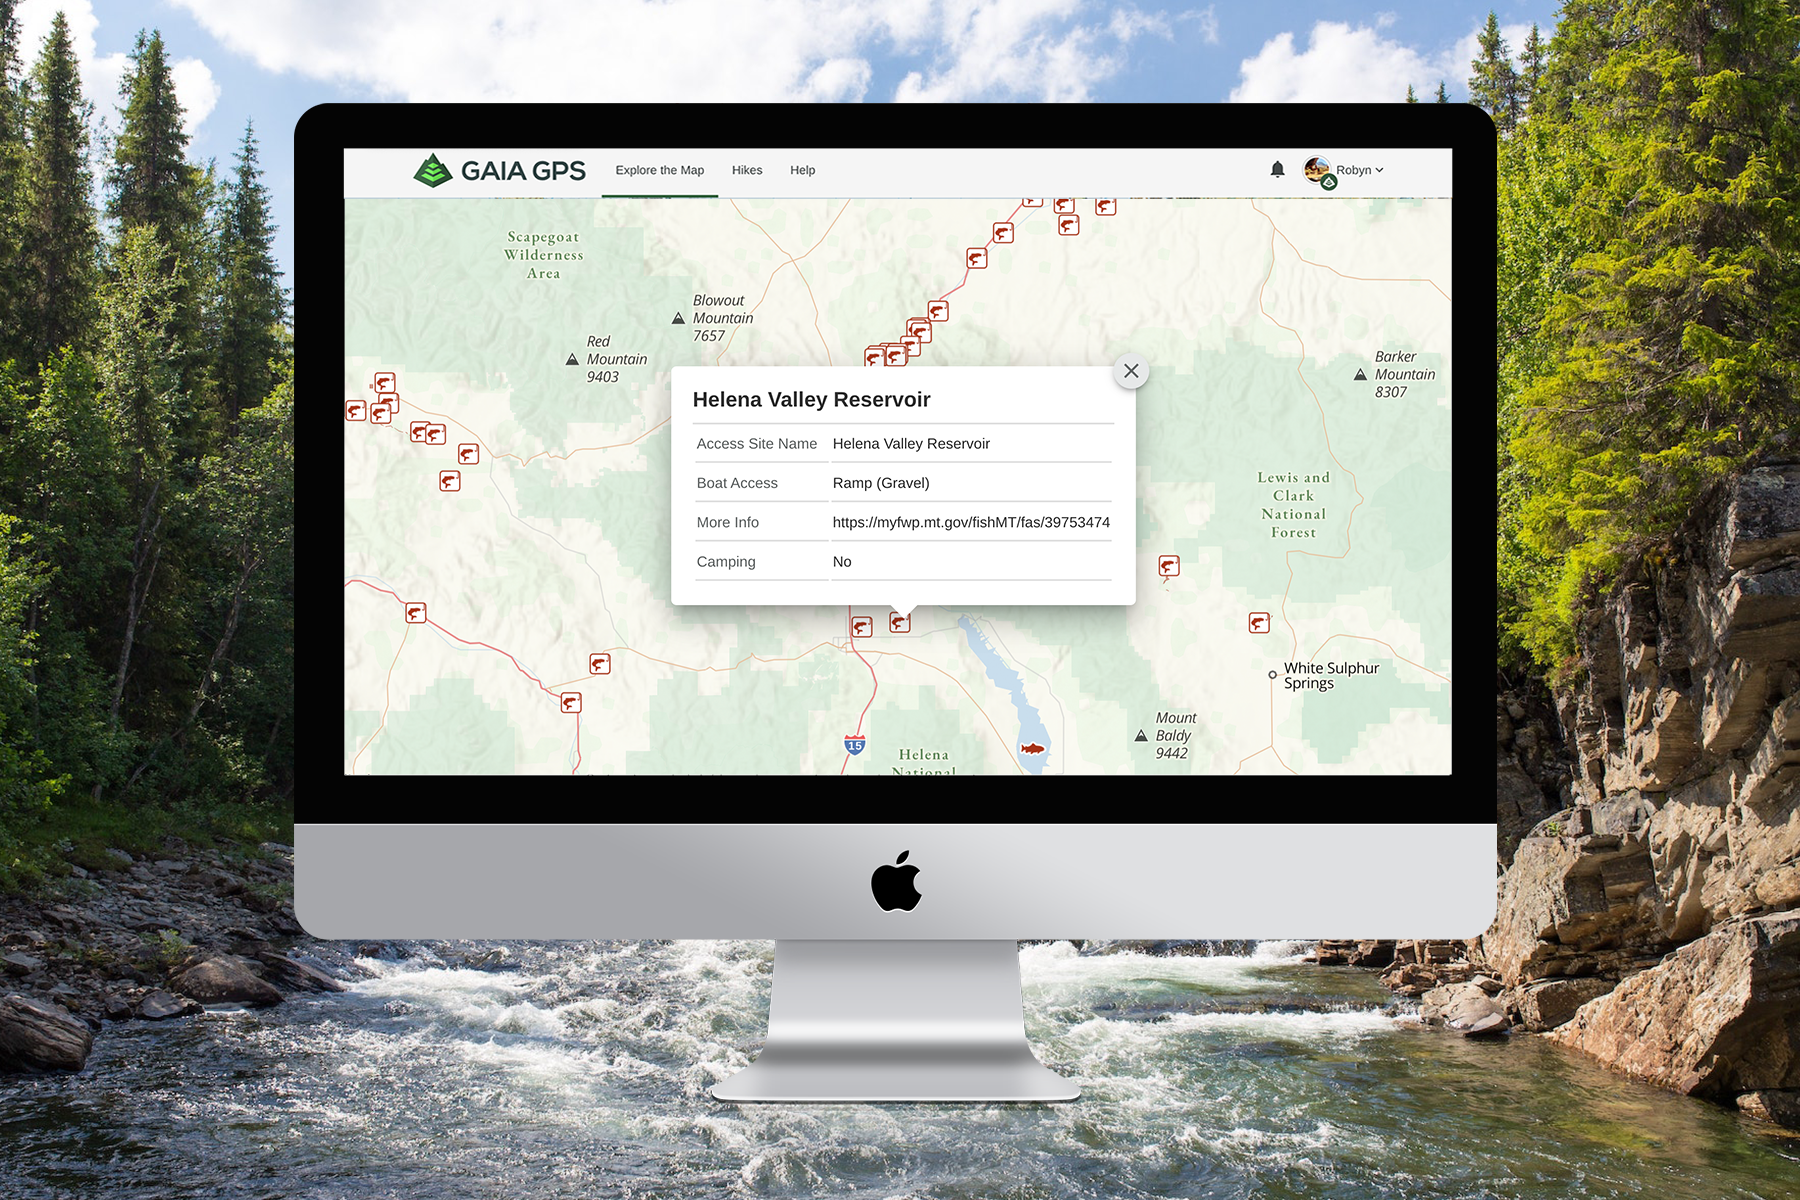 Plan Where to Fish with USGS Streamflow and Gaia Fishing Maps - Gaia GPS